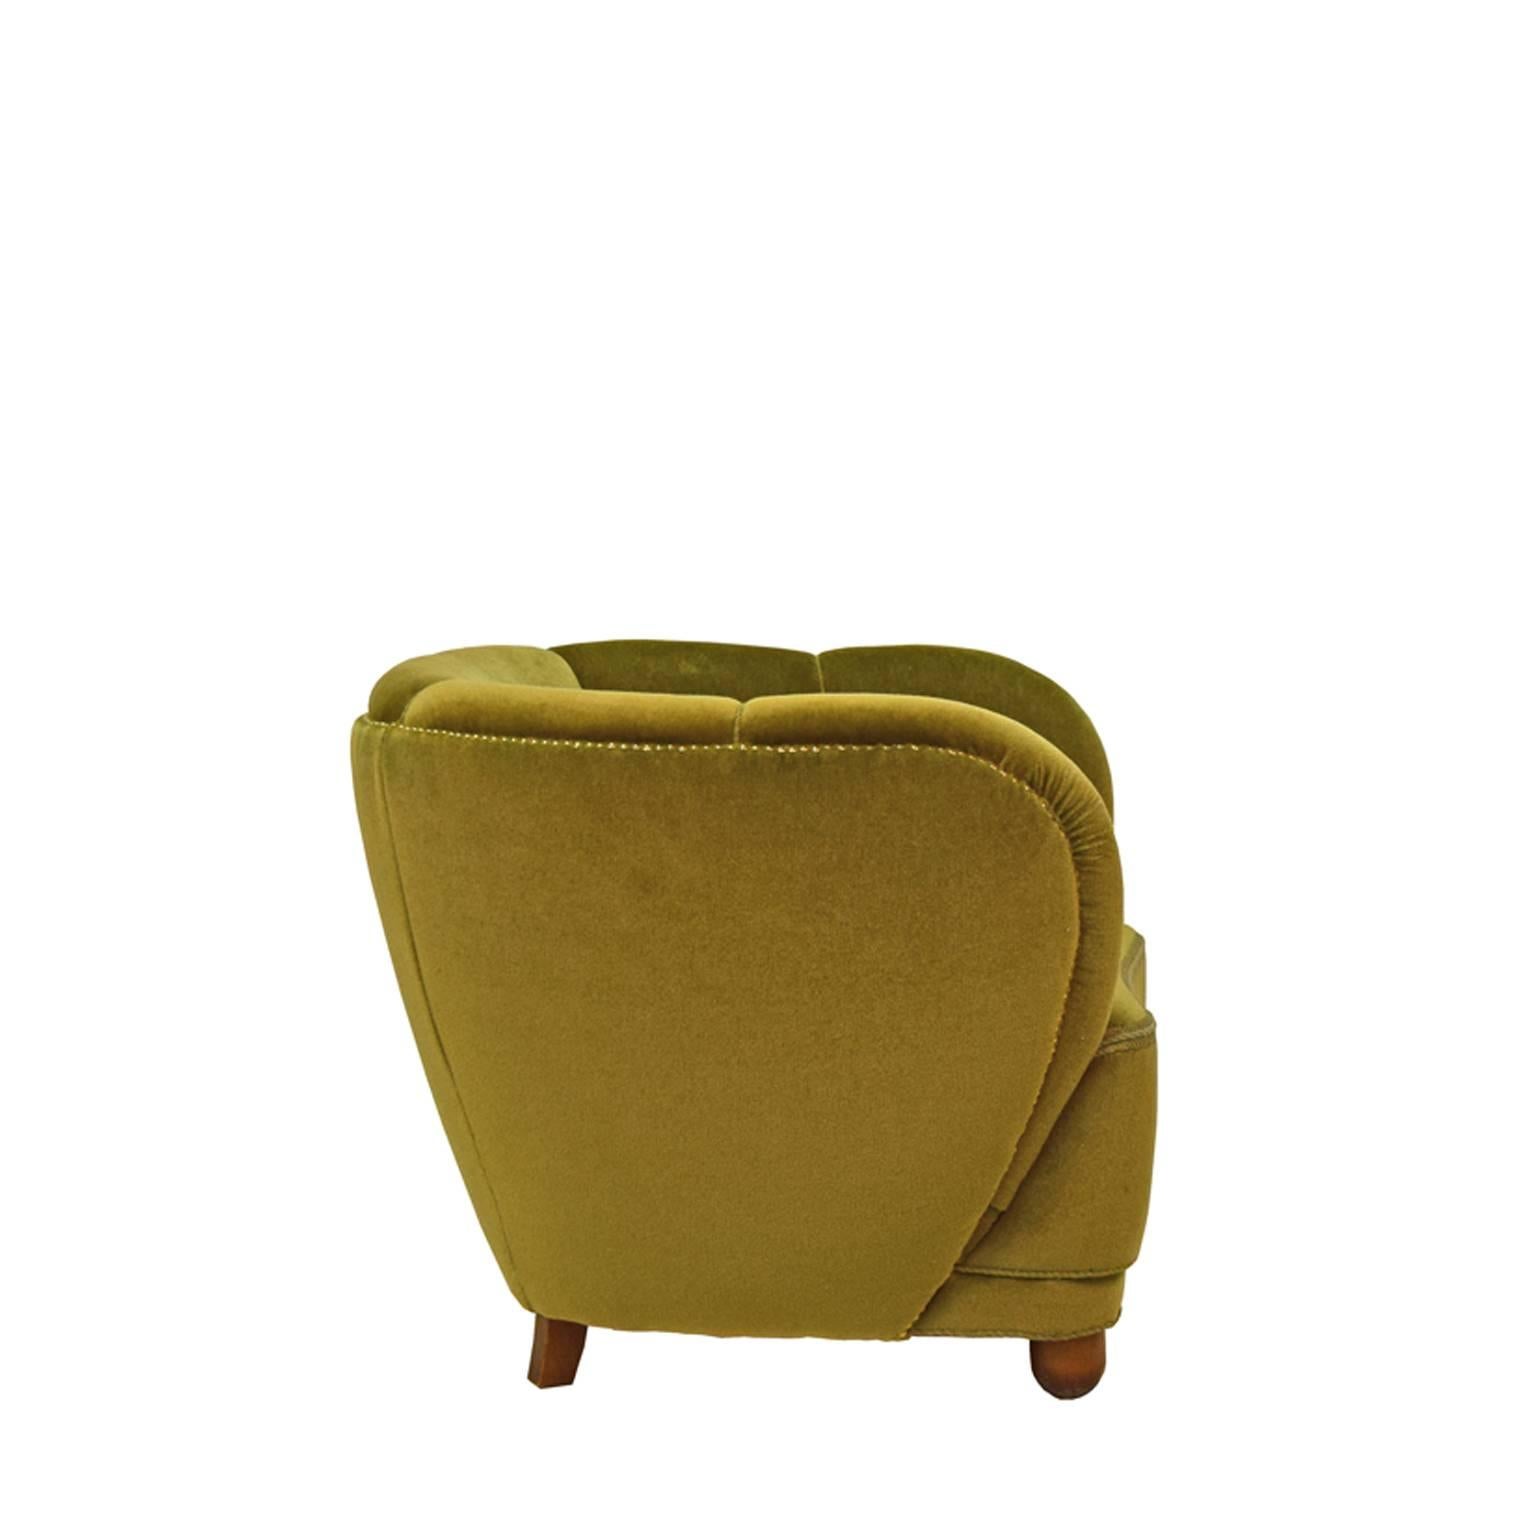 Danish easy chair on solid beach legs with green velour upholstery.